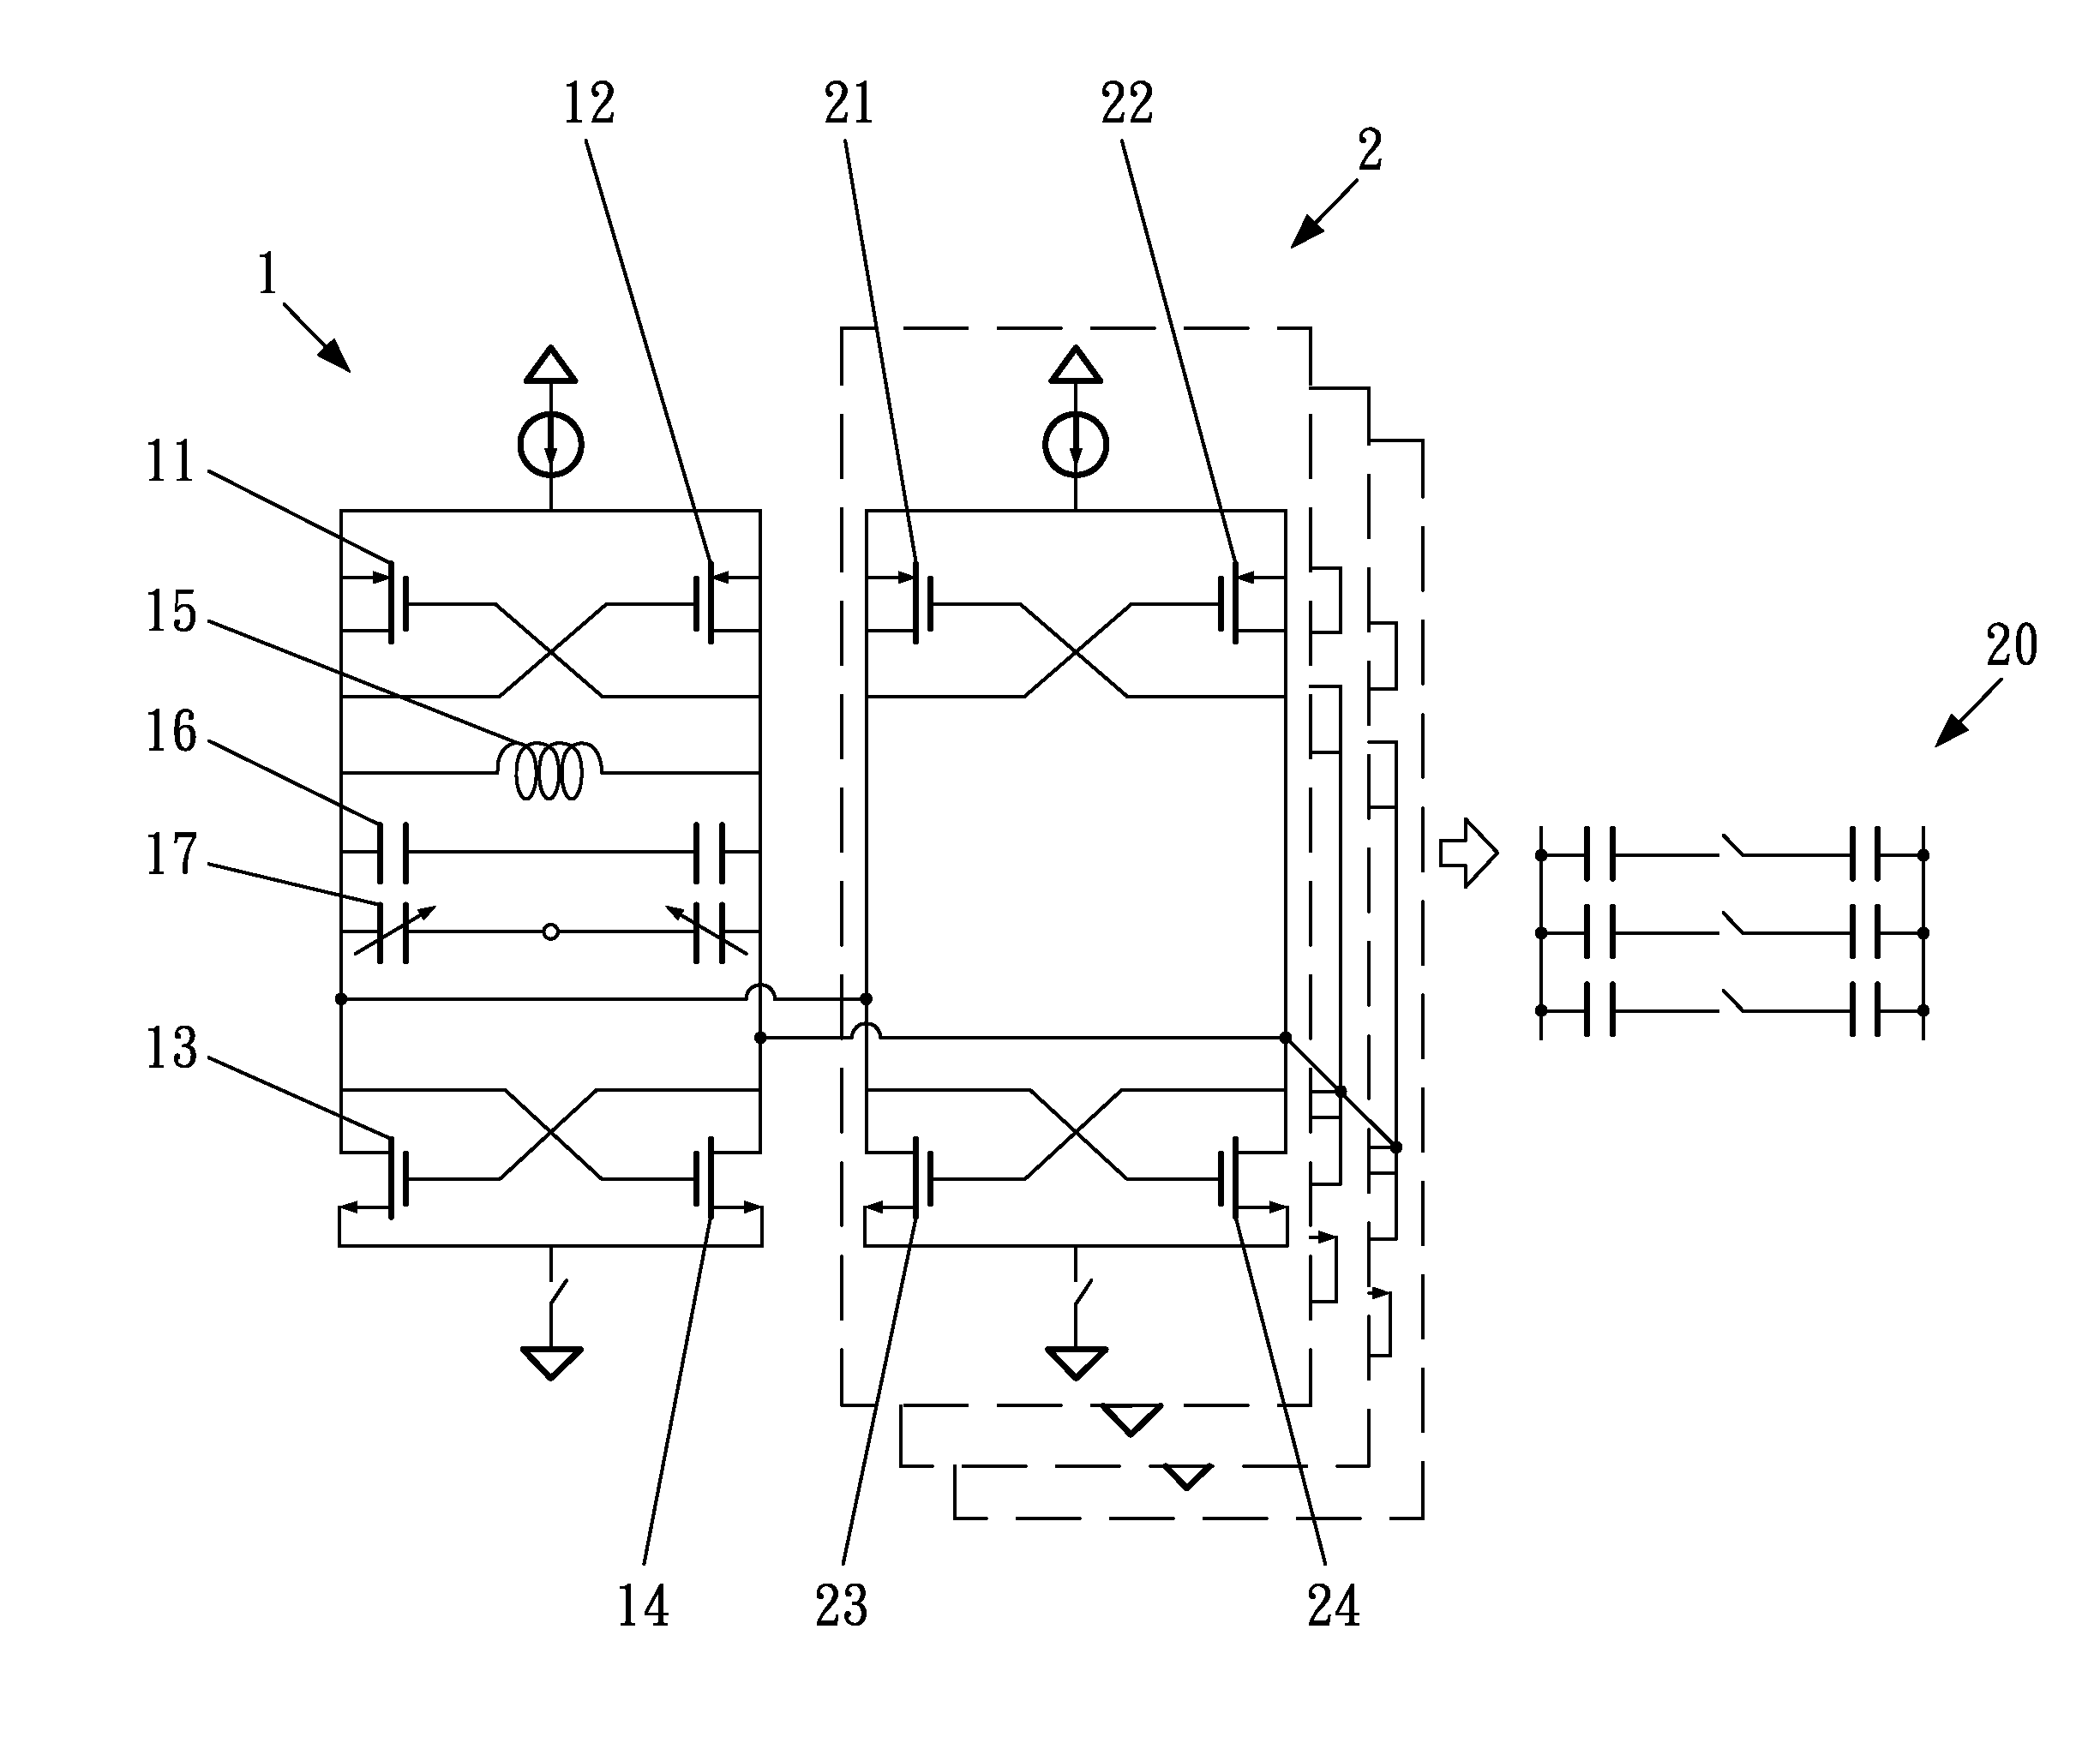 Voltage-controlled oscillator with high loop gain